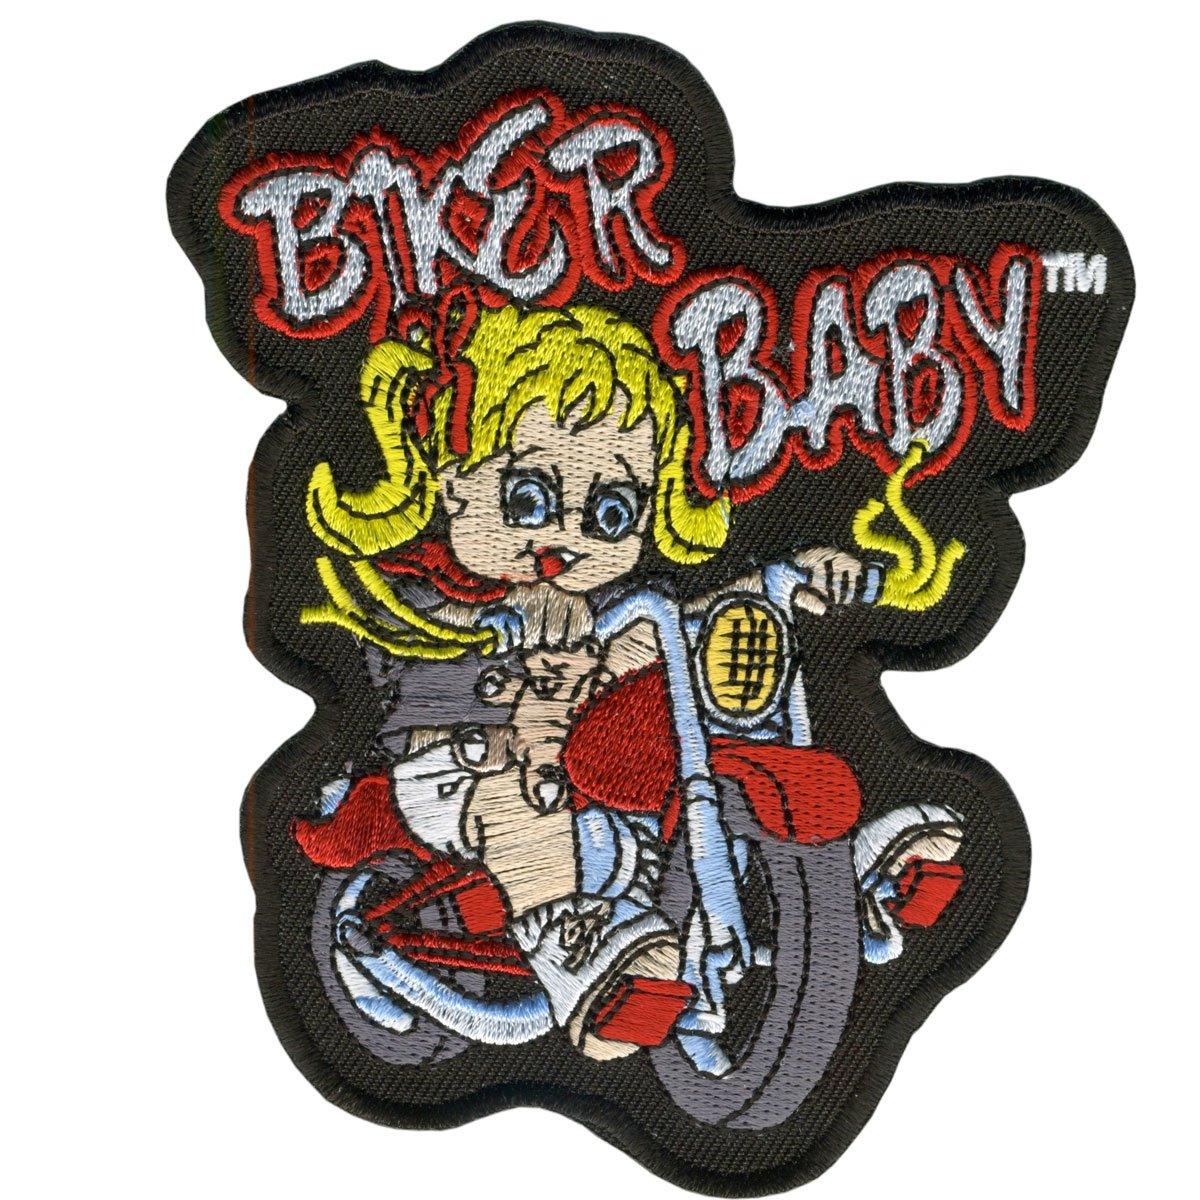 Hot Leathers Biker Baby Patch - American Legend Rider